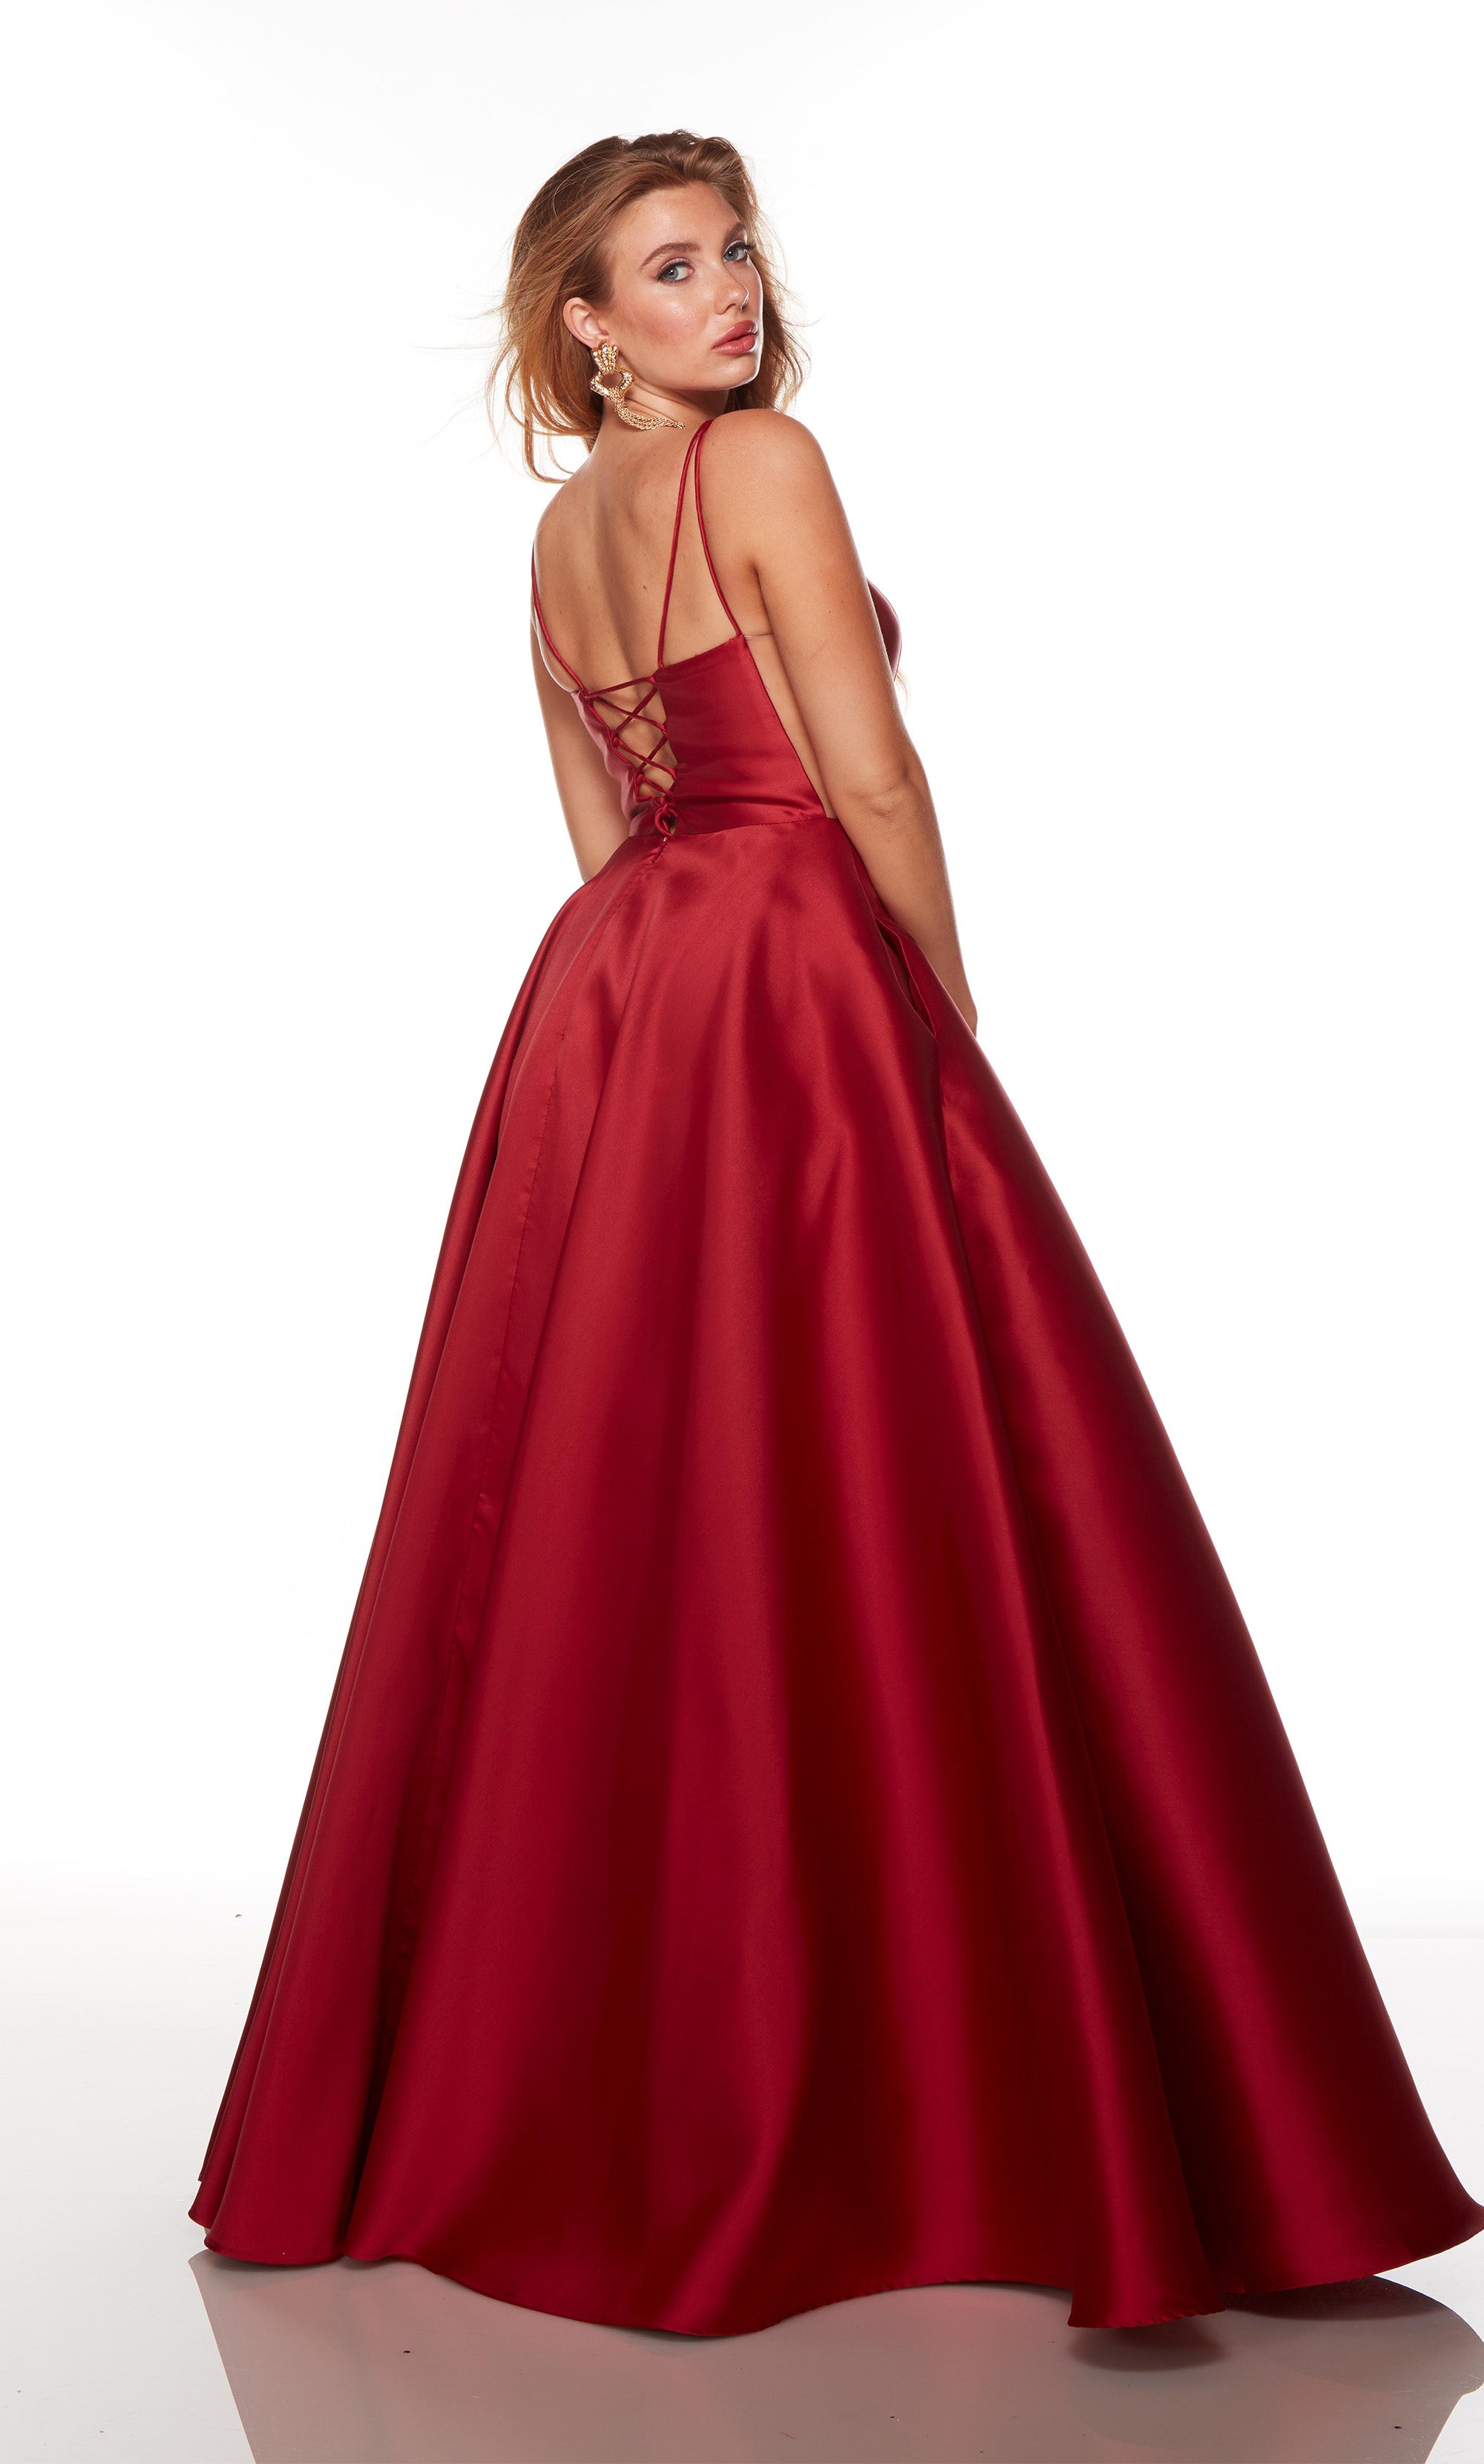 Scoop neck, wine red prom dress with a pleated skirt. COLOR-SWATCH_1751__WINE